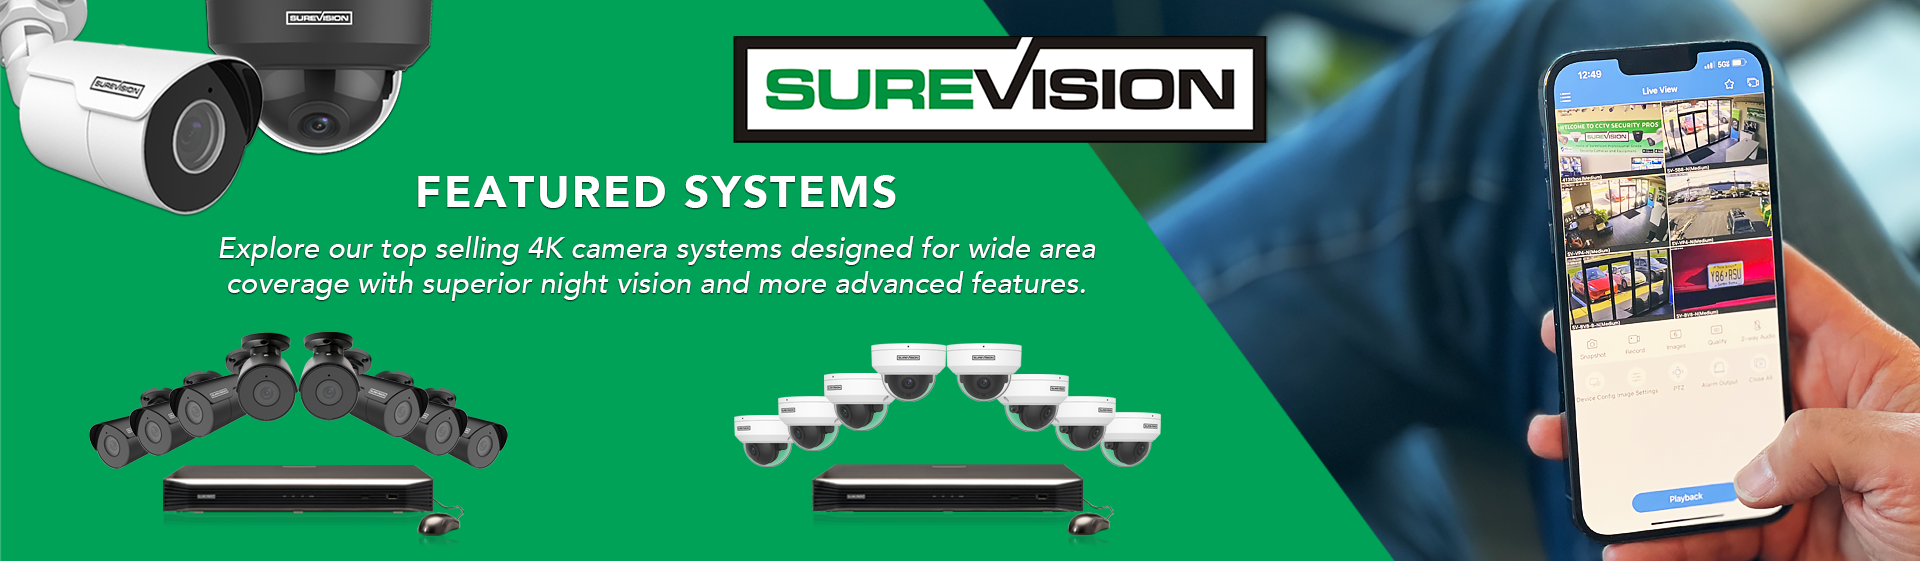 CCTV | Top Selling CCTV Systems 